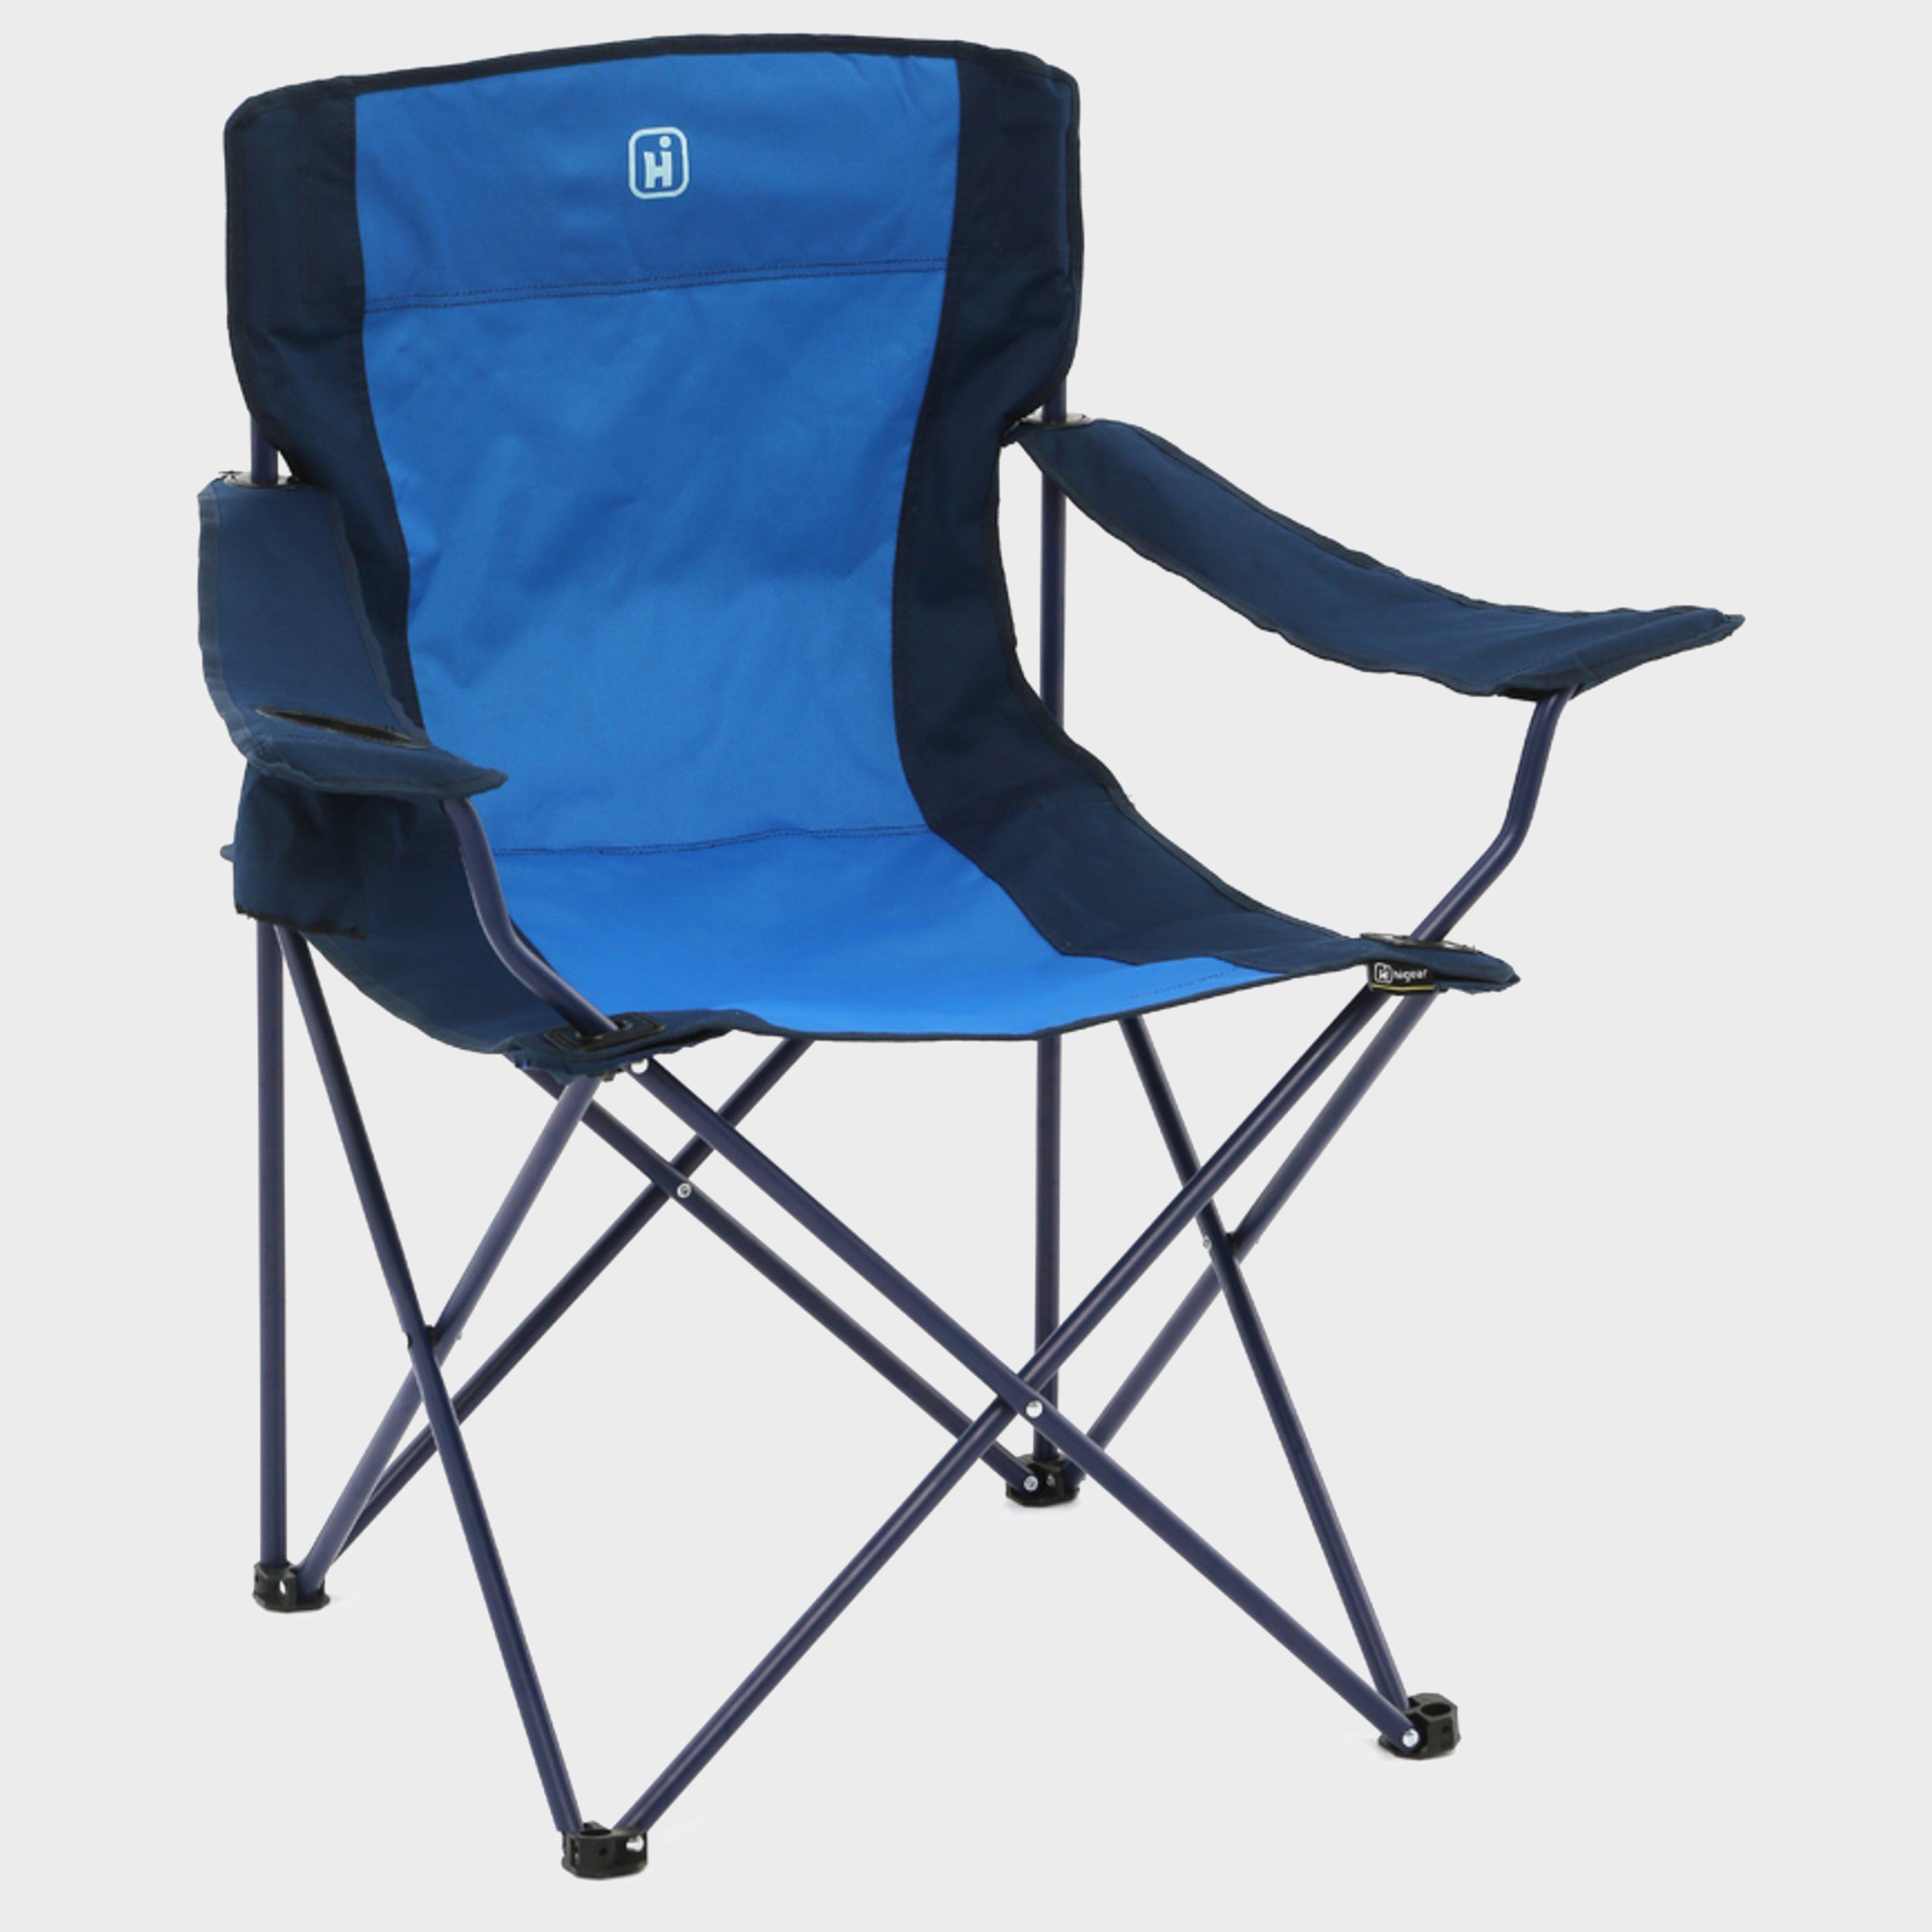 Maine Camping Chair - Blue, Blue